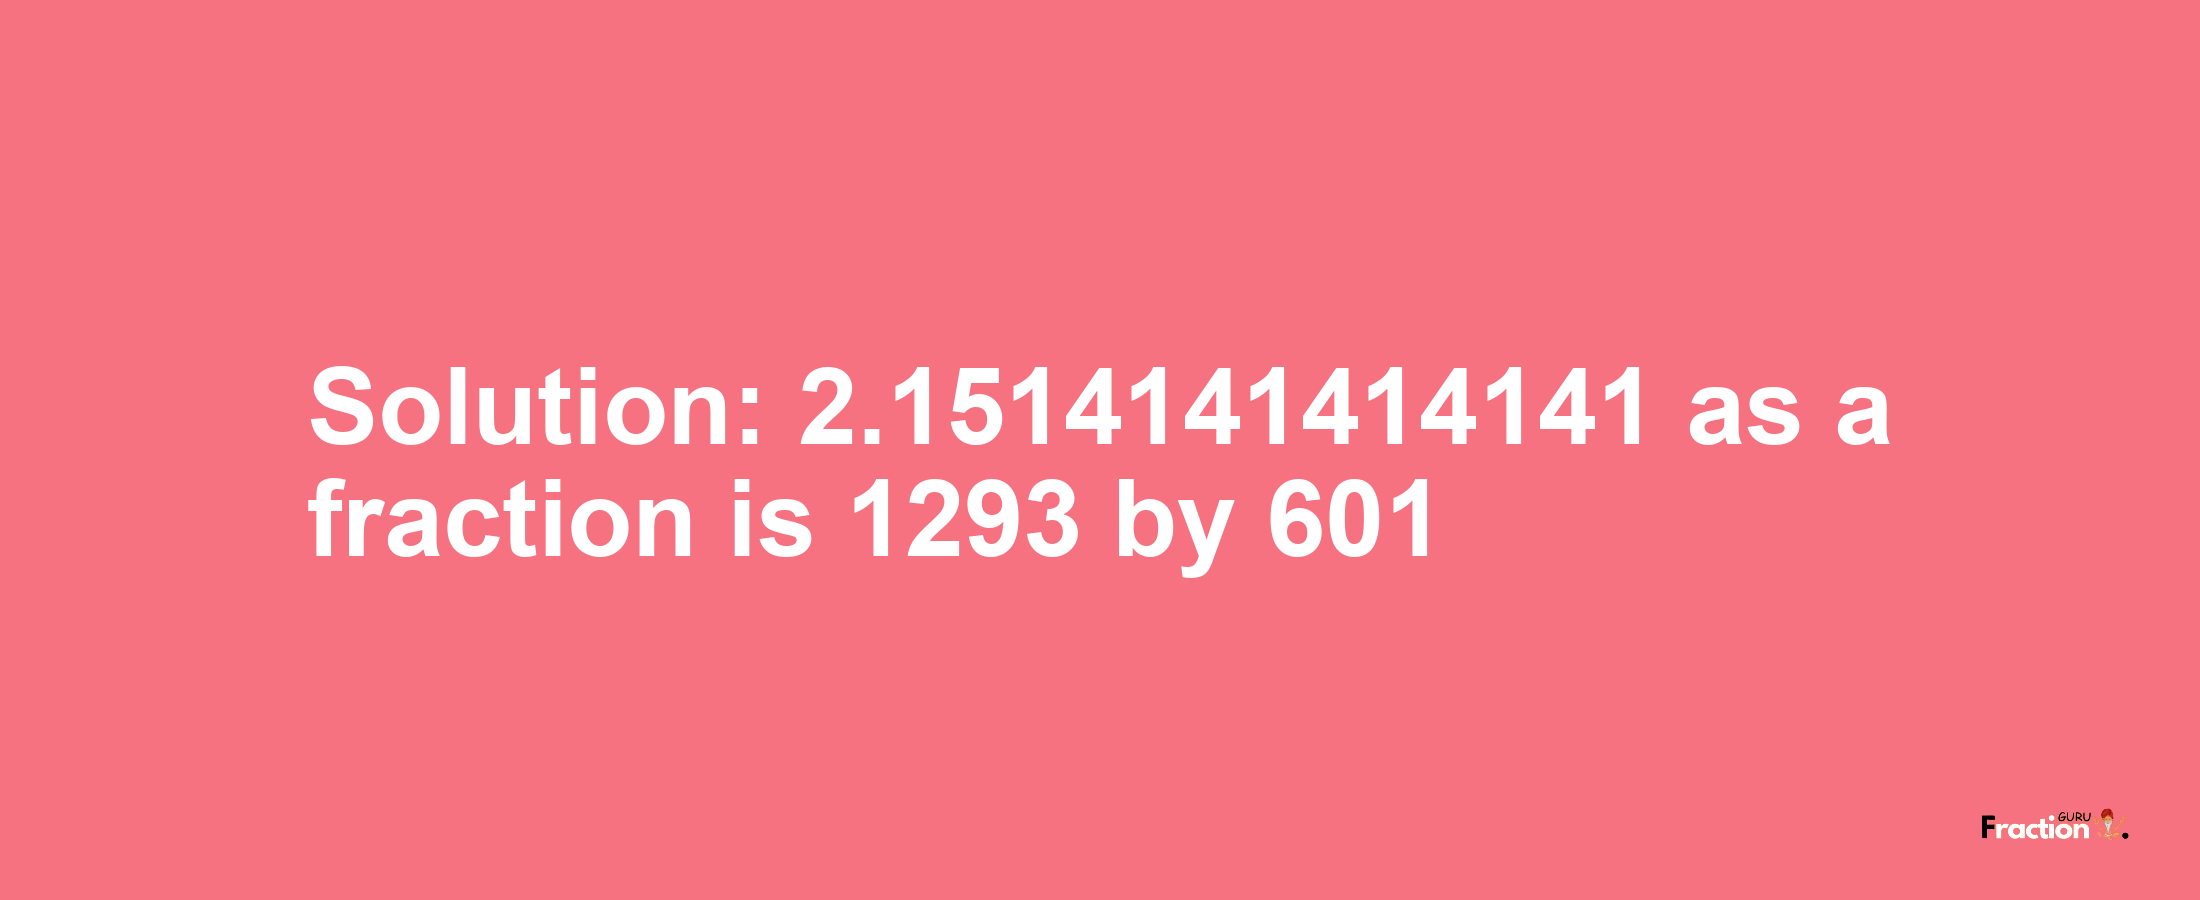 Solution:2.1514141414141 as a fraction is 1293/601